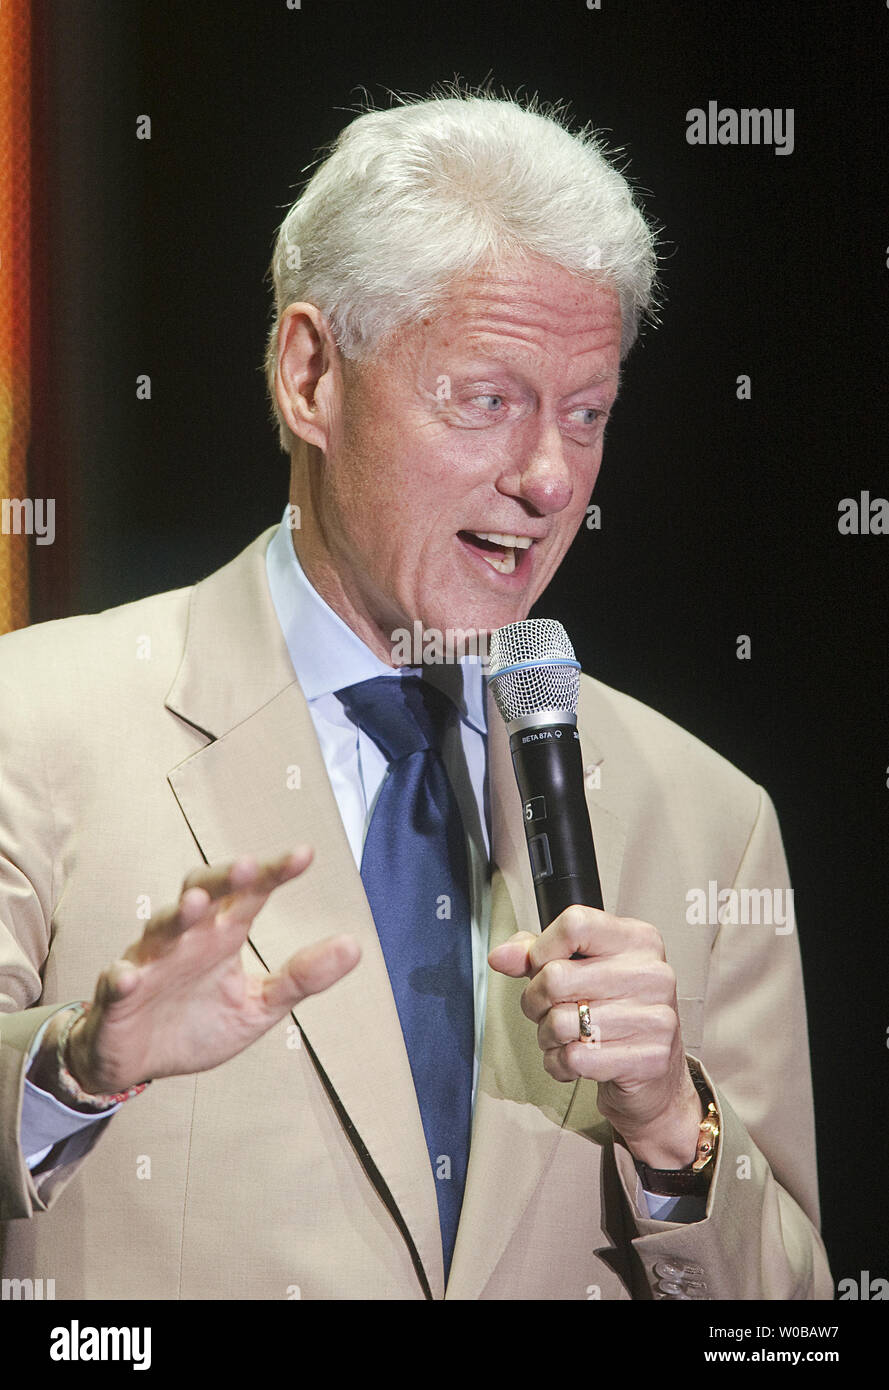 Former President Bill Clinton speaks during Sarah McLachlan's Voices in the Park benefit concert in Stanley Park, Vancouver, British Columbia on September 15, 2012. Funds raised from the concert will support The Sarah McLachlan School of Music.   UPI Photo /Heinz Ruckemann Stock Photo